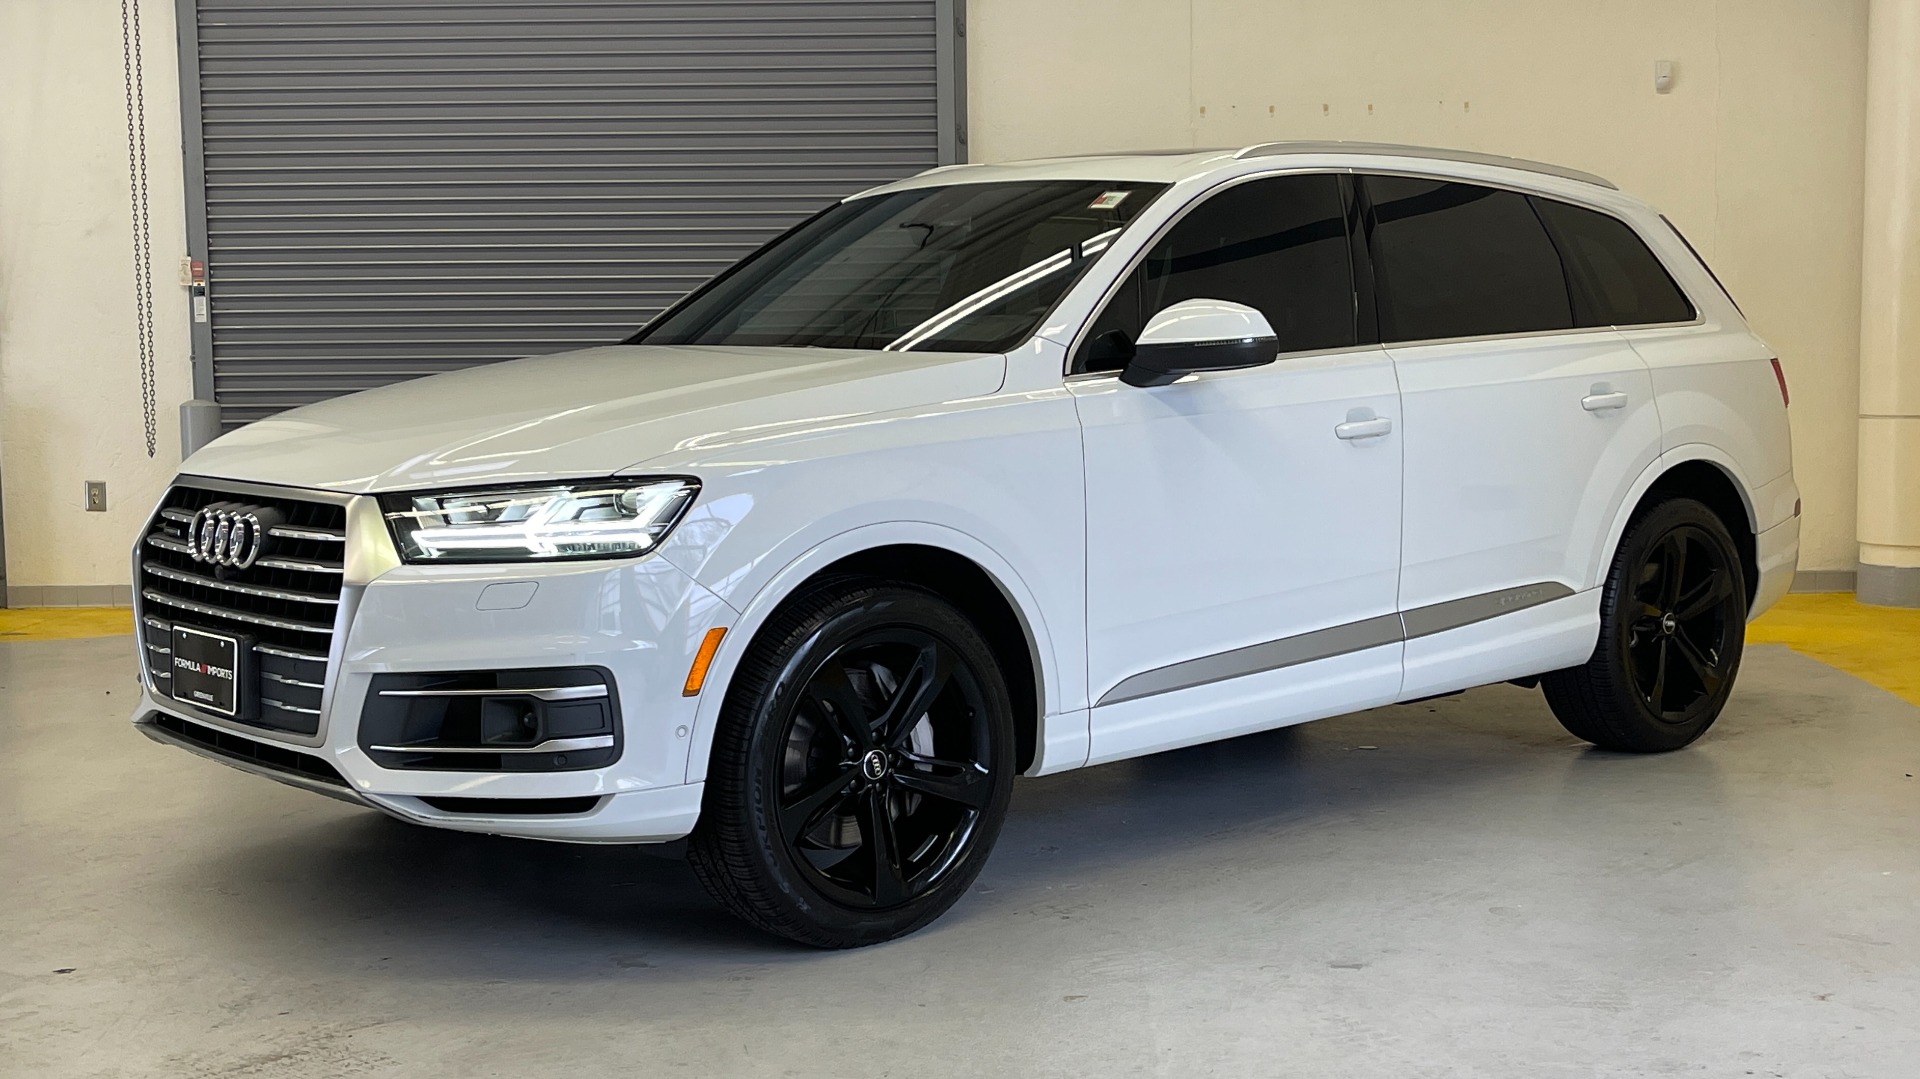 Used 2019 Audi Q7 PRESTIGE / NAV / SUNROOF / LANE ASST / TOWING / 21-IN WHLS / REA for sale $63,695 at Formula Imports in Charlotte NC 28227 3